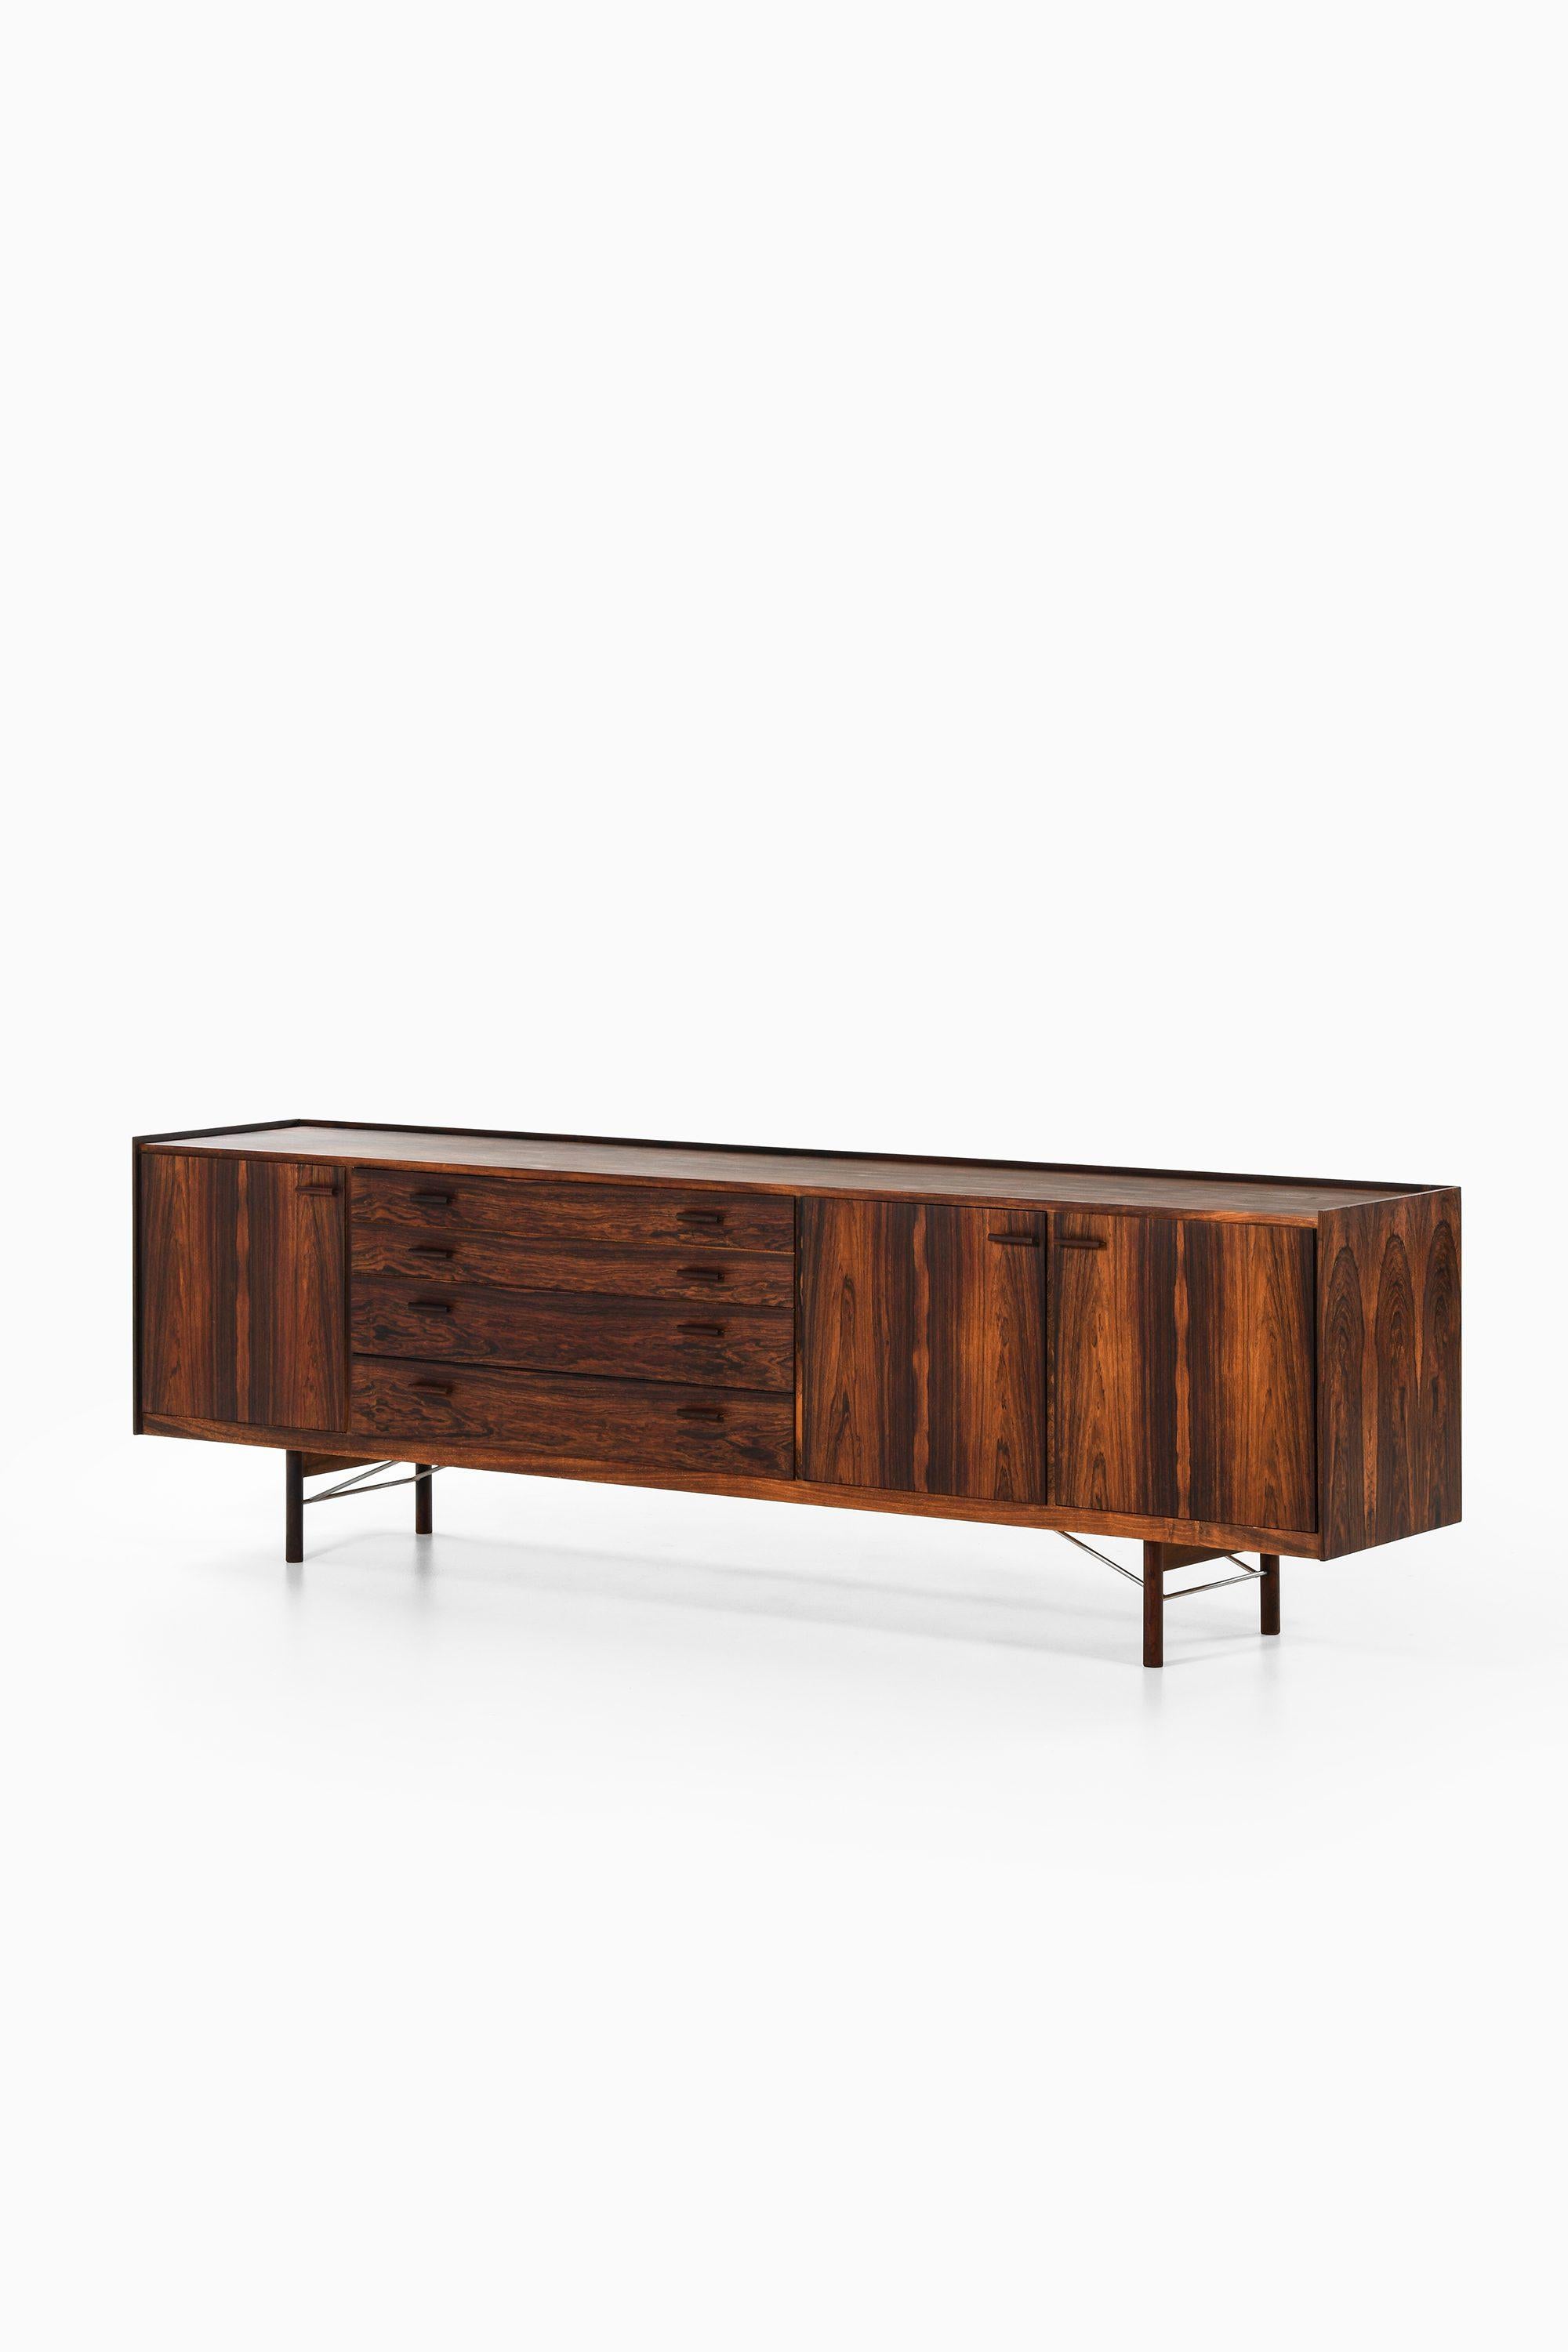 Sideboard in Rosewood and Steel by Ib Kofod-Larsen, 1960s

Additional Information:
Material: Rosewood, steel
Style: midcentury, Scandinavian
Produced by Brande Møbelfabrik in Denmark
Dimensions (W x D x H): 258 x 50 x 79.5 cm
Condition: Good